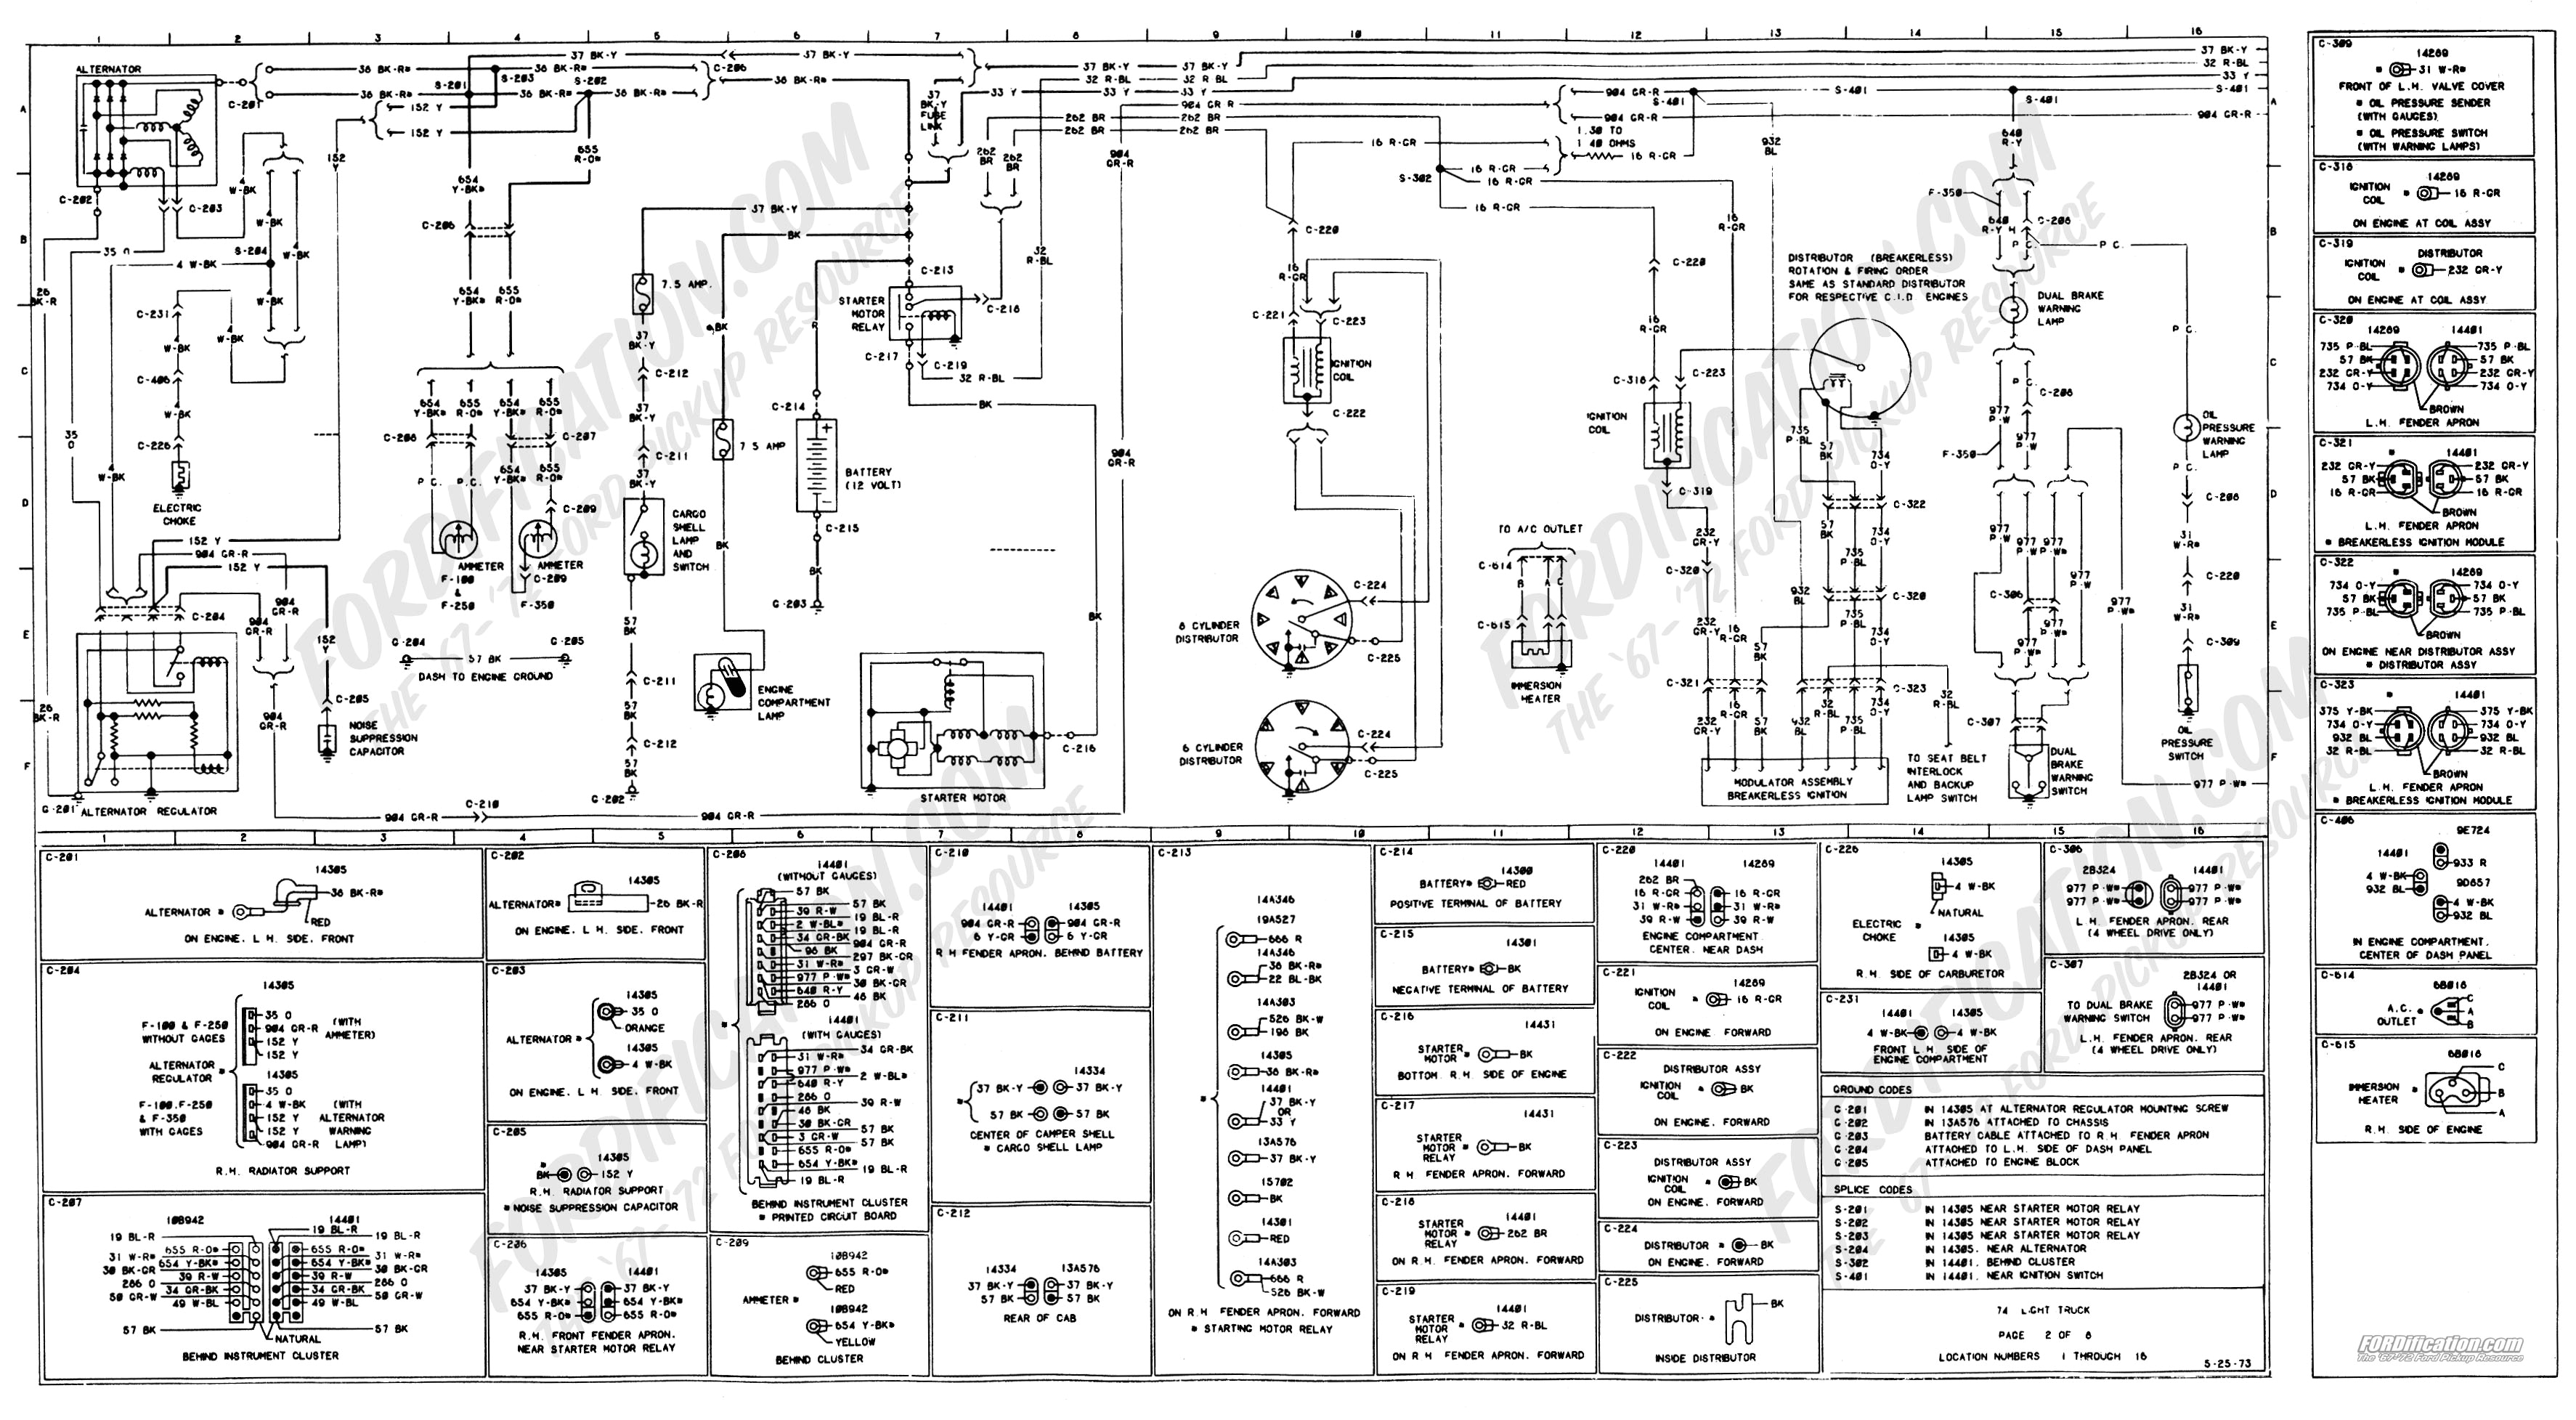 wiring diagram for 1974 ford f250 wiring diagram load 1974 f250 wiring diagram 1974 f250 wiring diagram